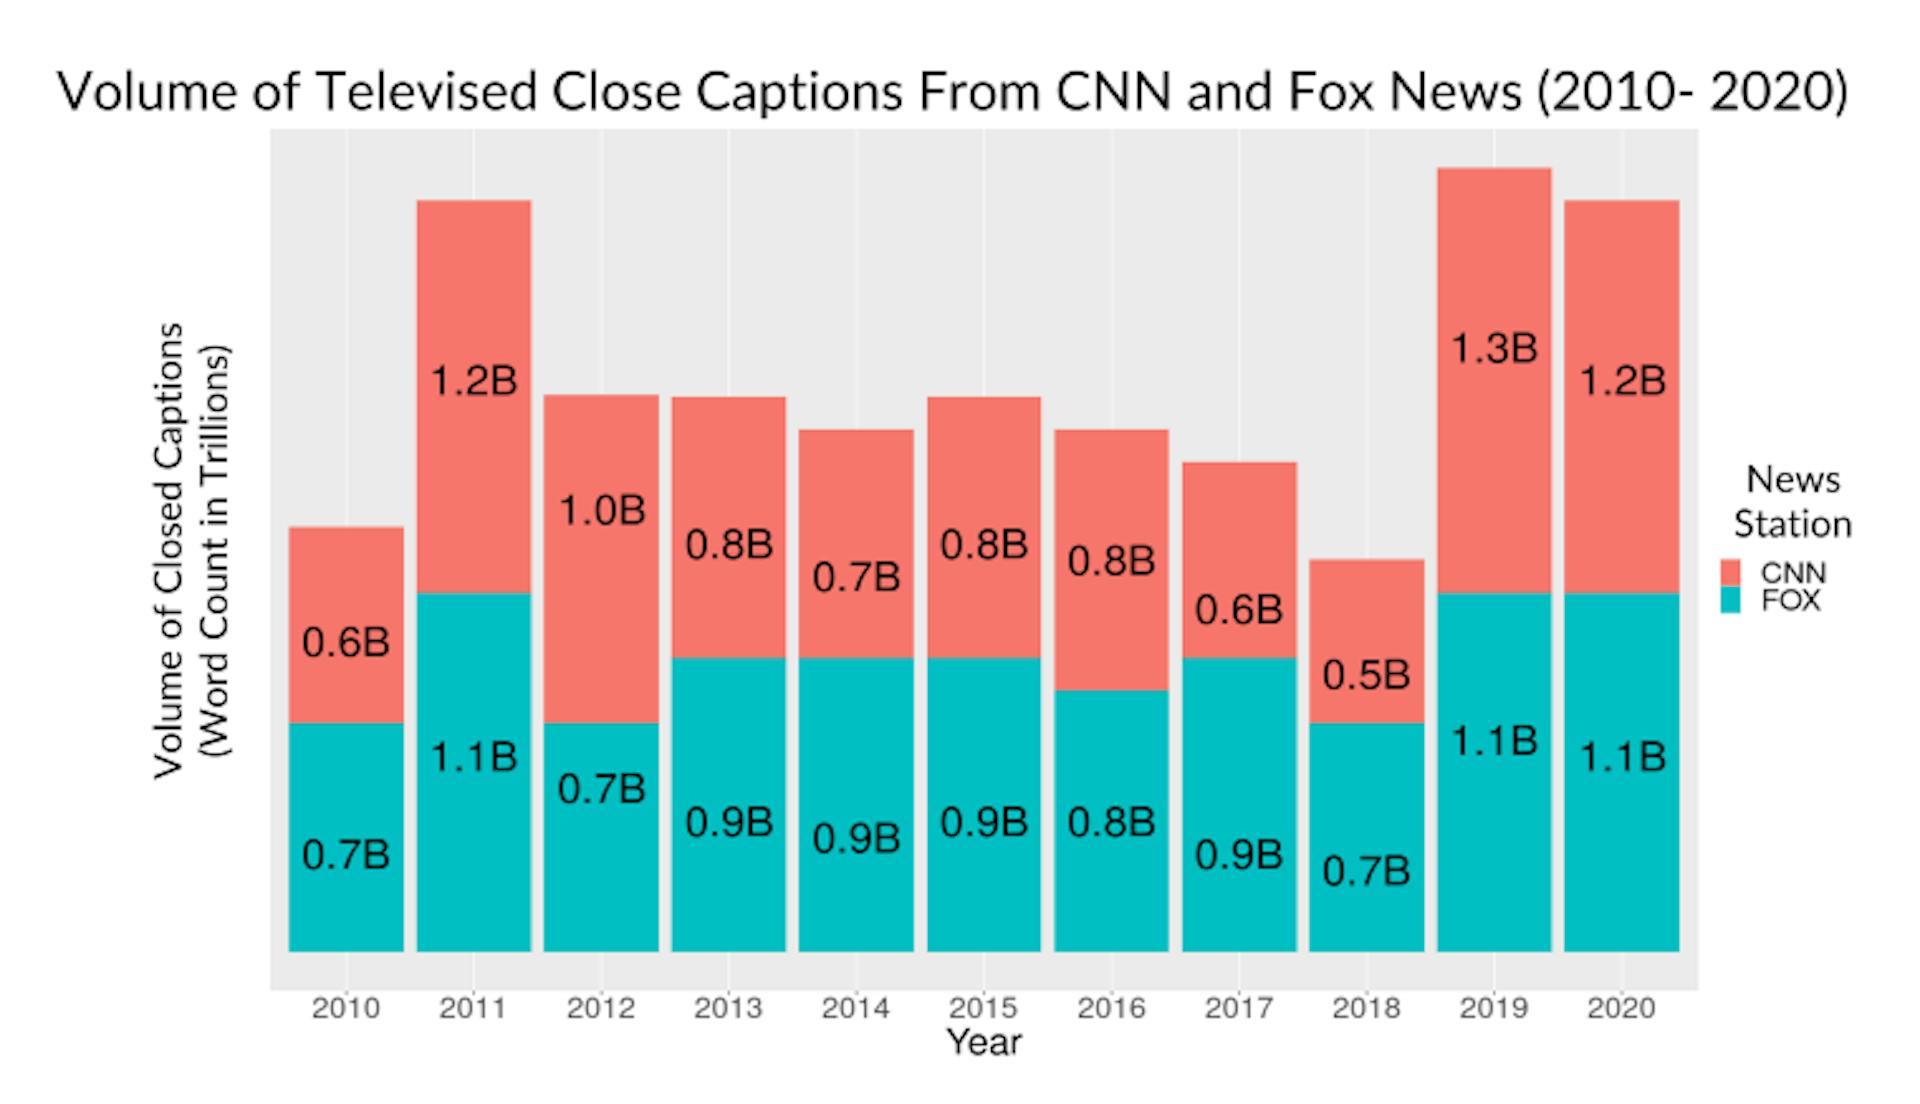 Figure 1: Volume of televised closed captions (word count) from CNN and Fox News stations from 2010 to 2020.